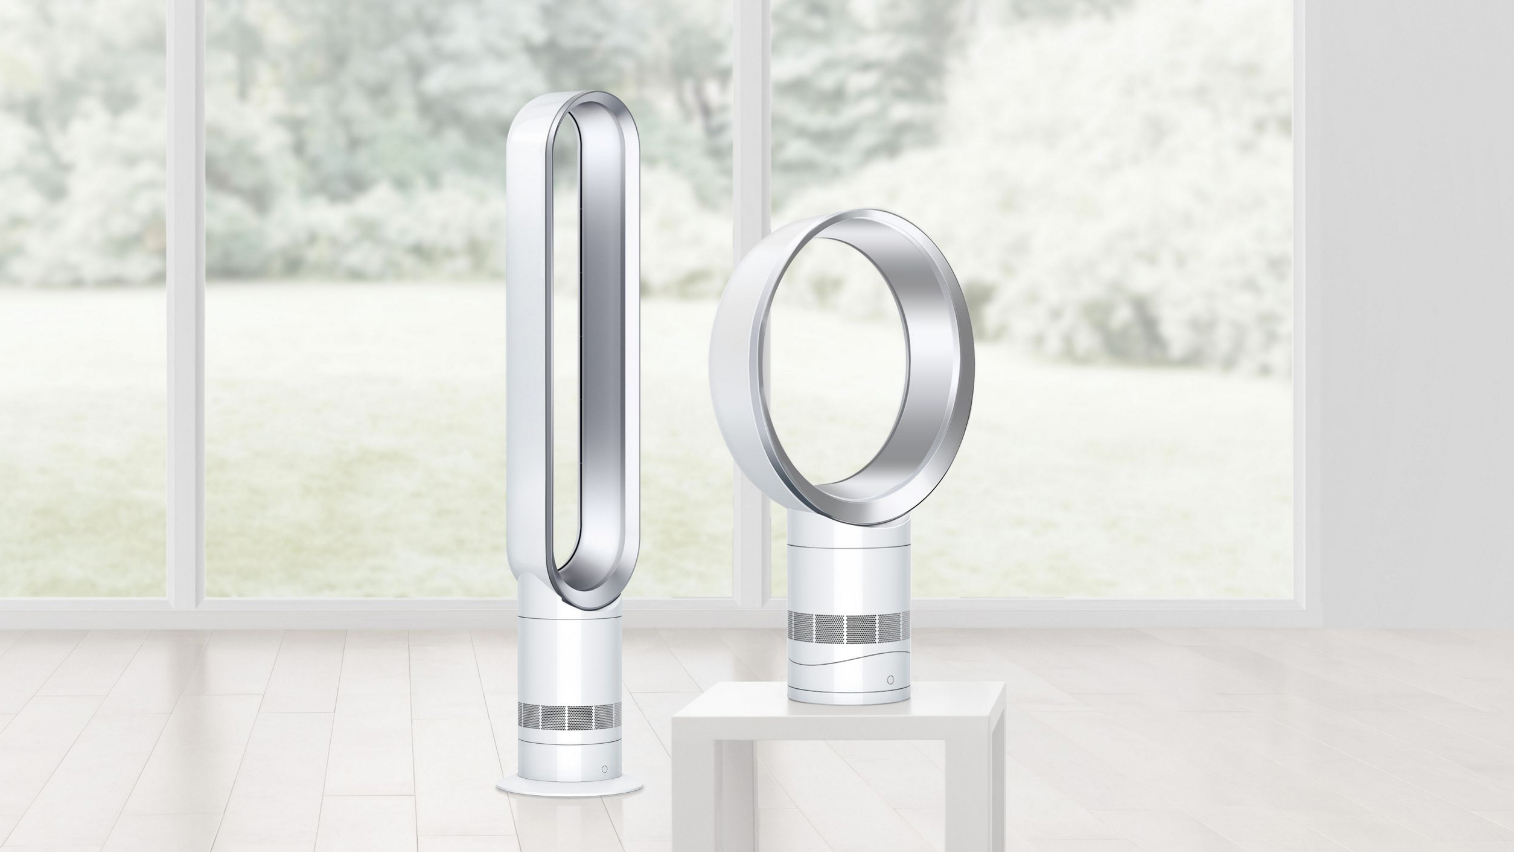 The Best Dyson Fan For Cooling Heating And Purifying 2019 intended for dimensions 1514 X 852